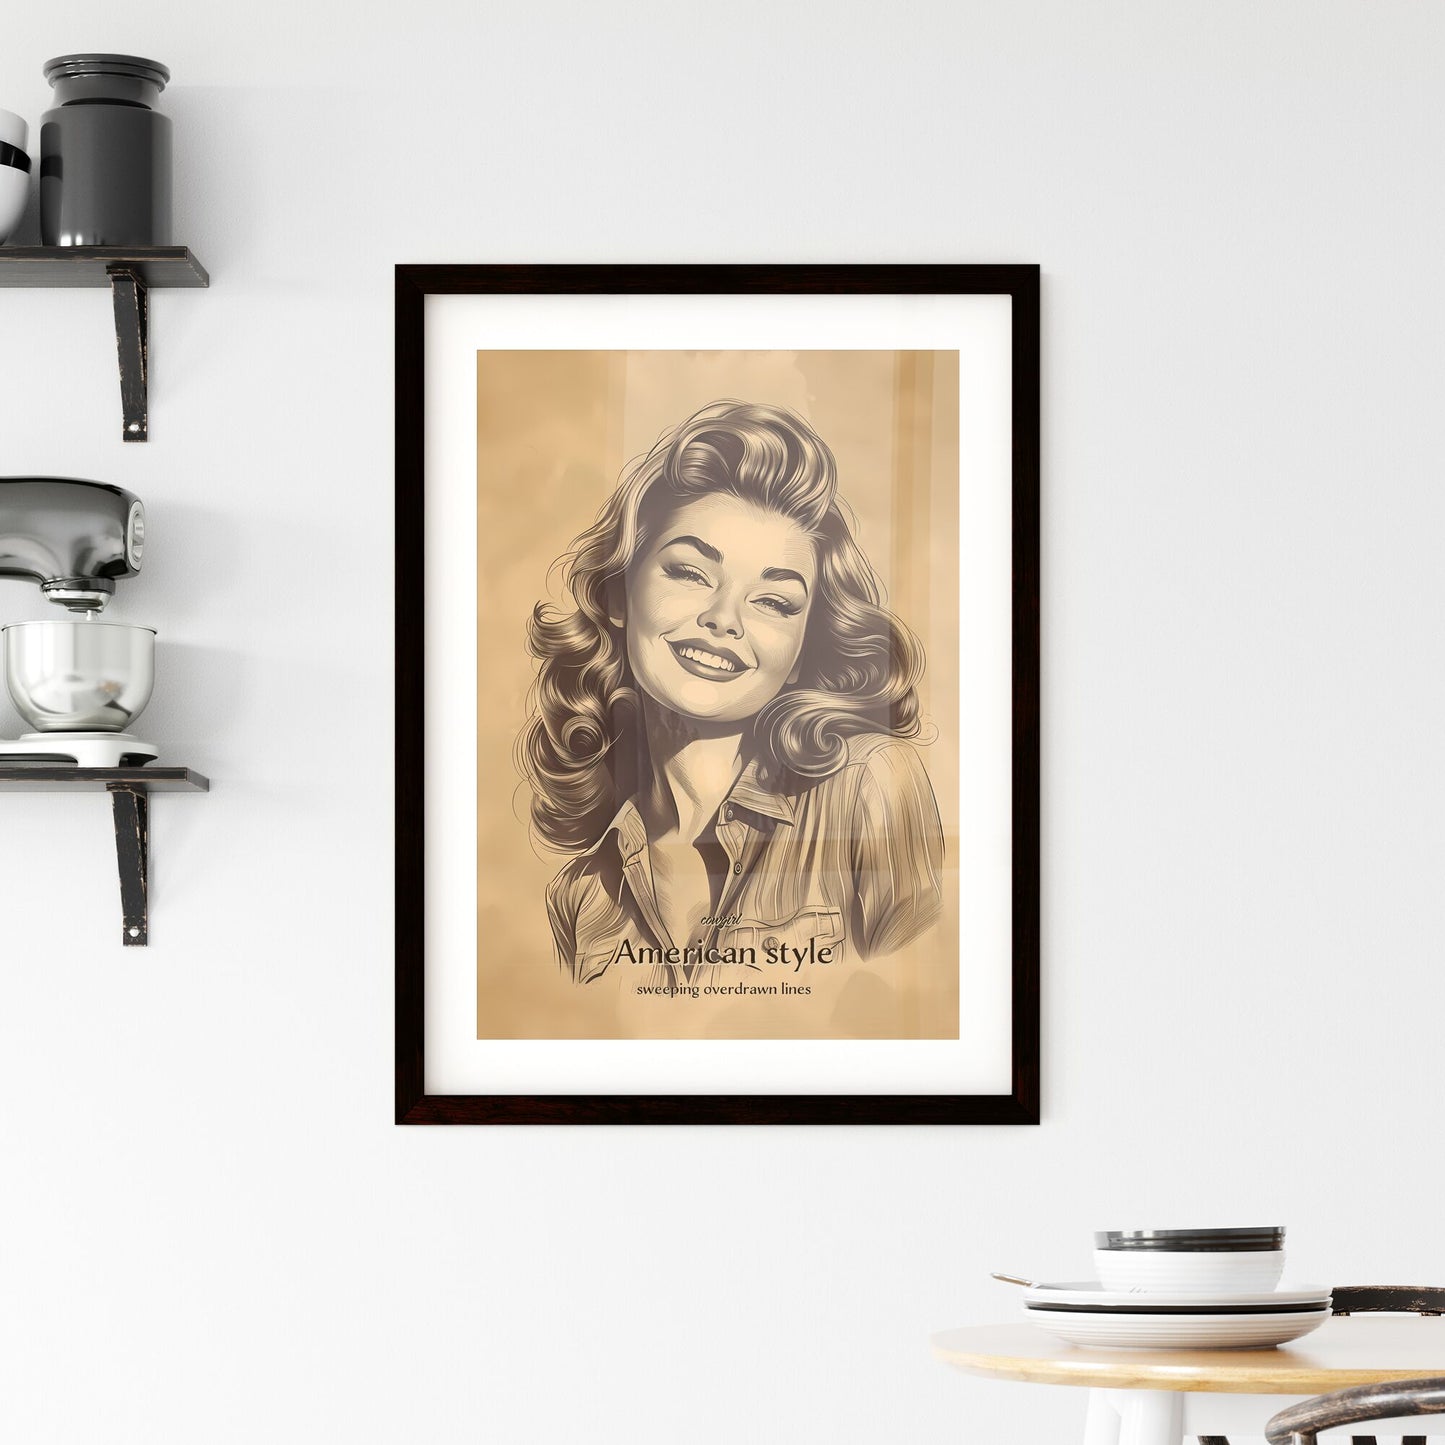 cowgirl, American style, sweeping overdrawn lines, A Poster of a woman with long hair smiling Default Title